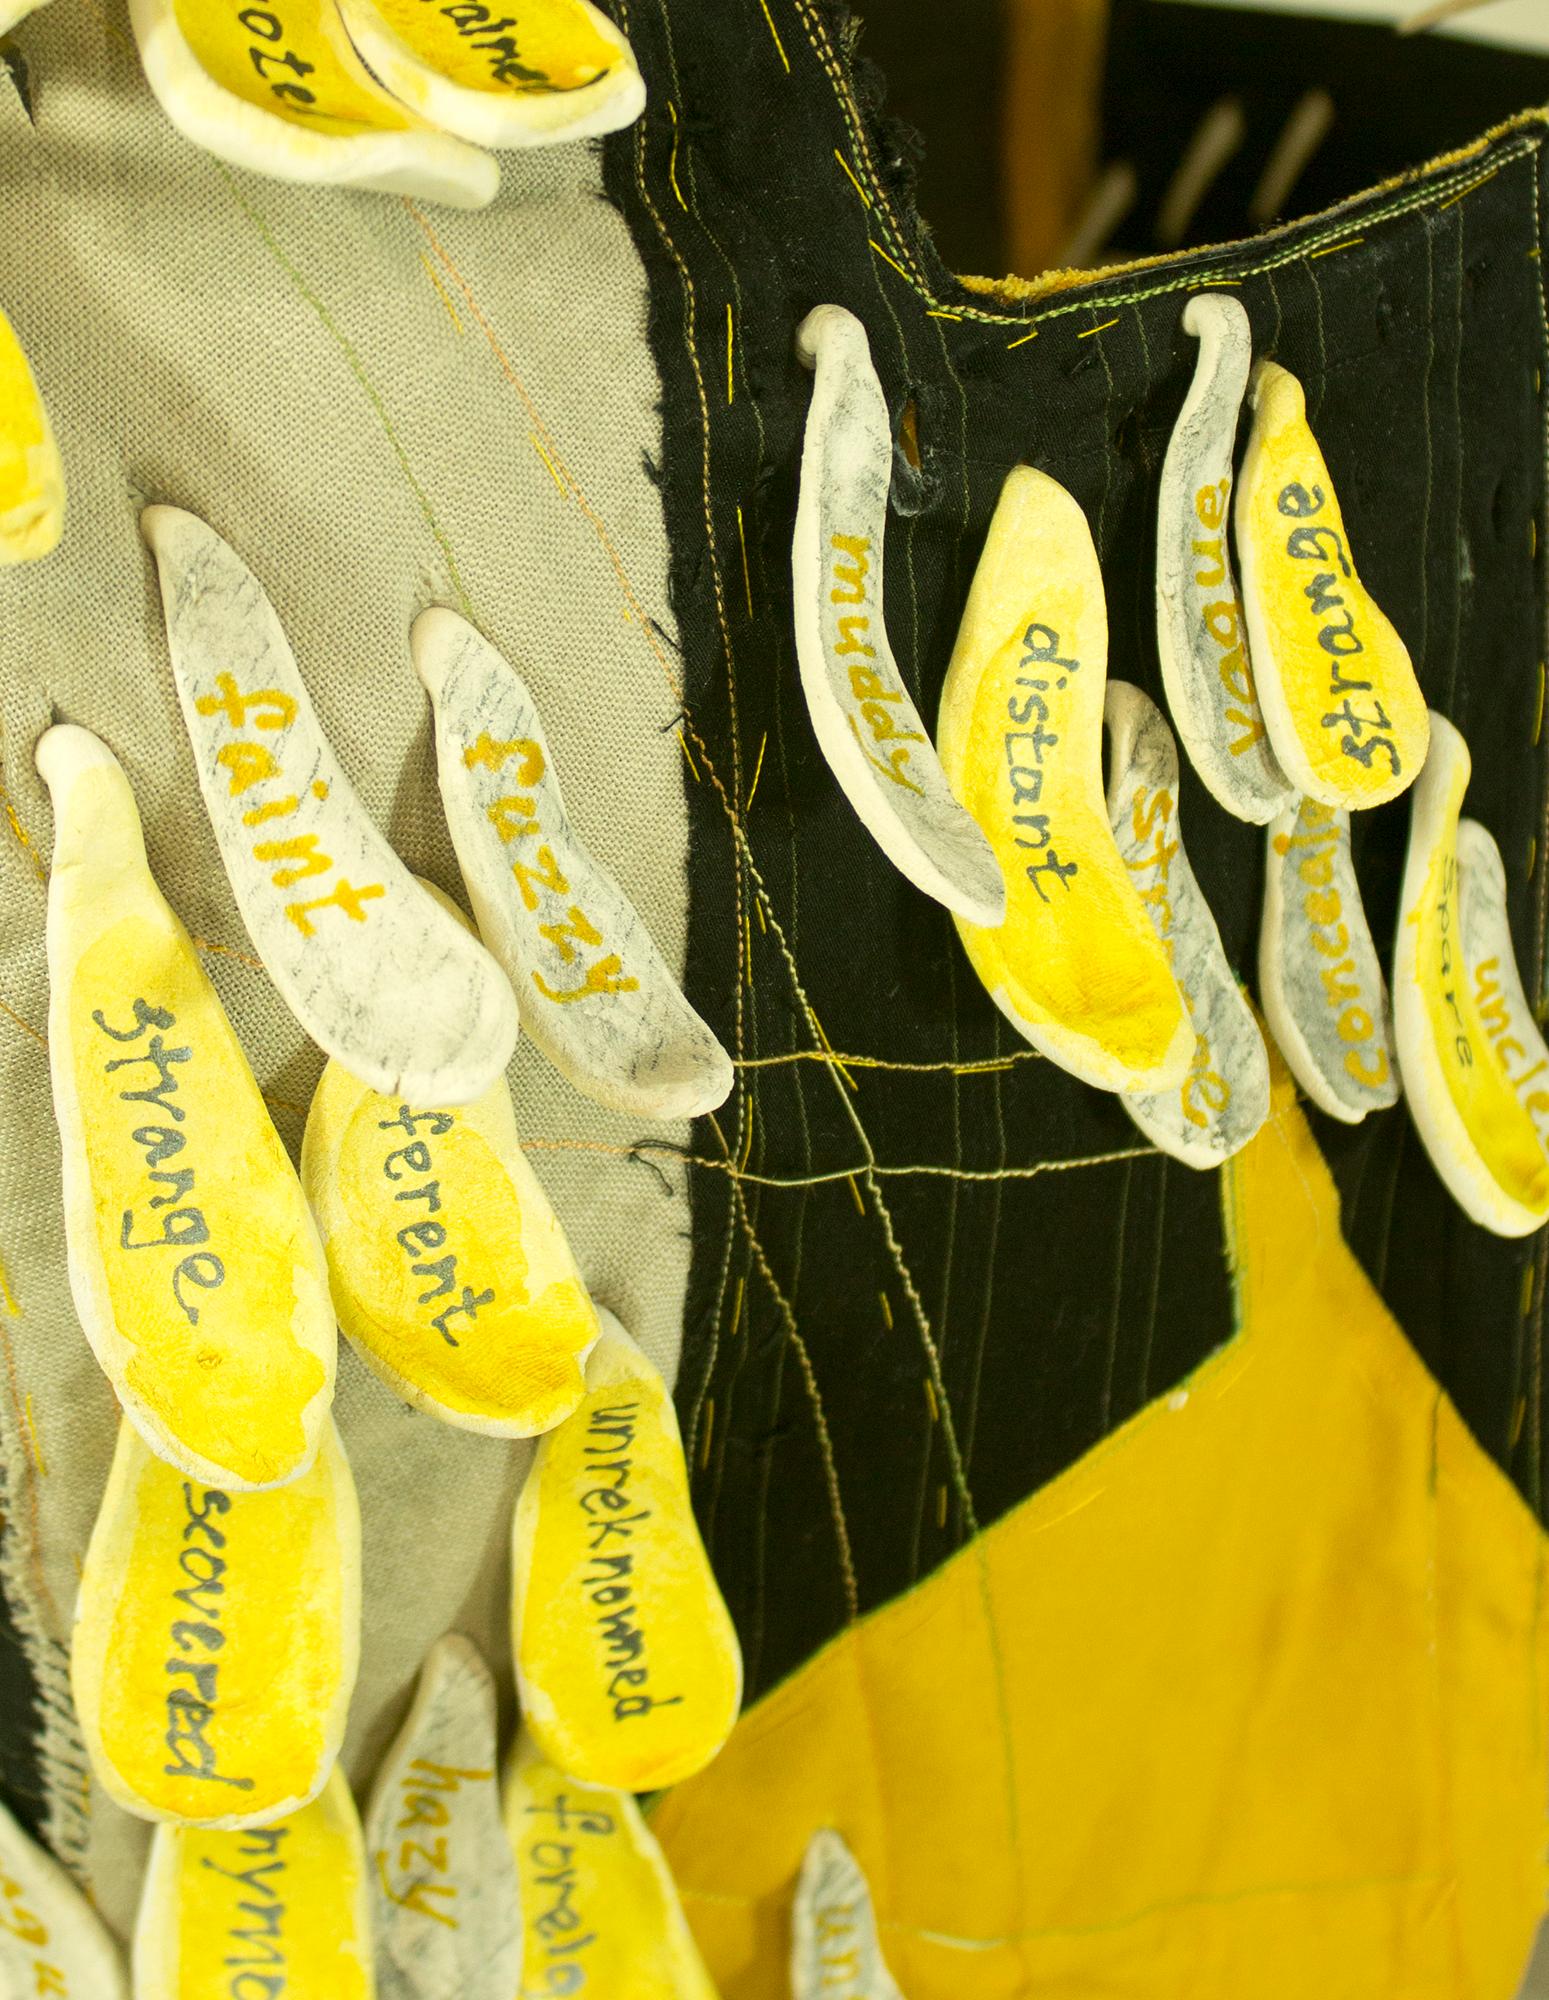 Virginia Mahoney’s “Caution” is a mixed-media sculpture in vest form, that is black with bright yellow accents, and has attached ceramic tags on which words referring to being cautious are handwritten. Ceramic spikes projecting inside emphasize the